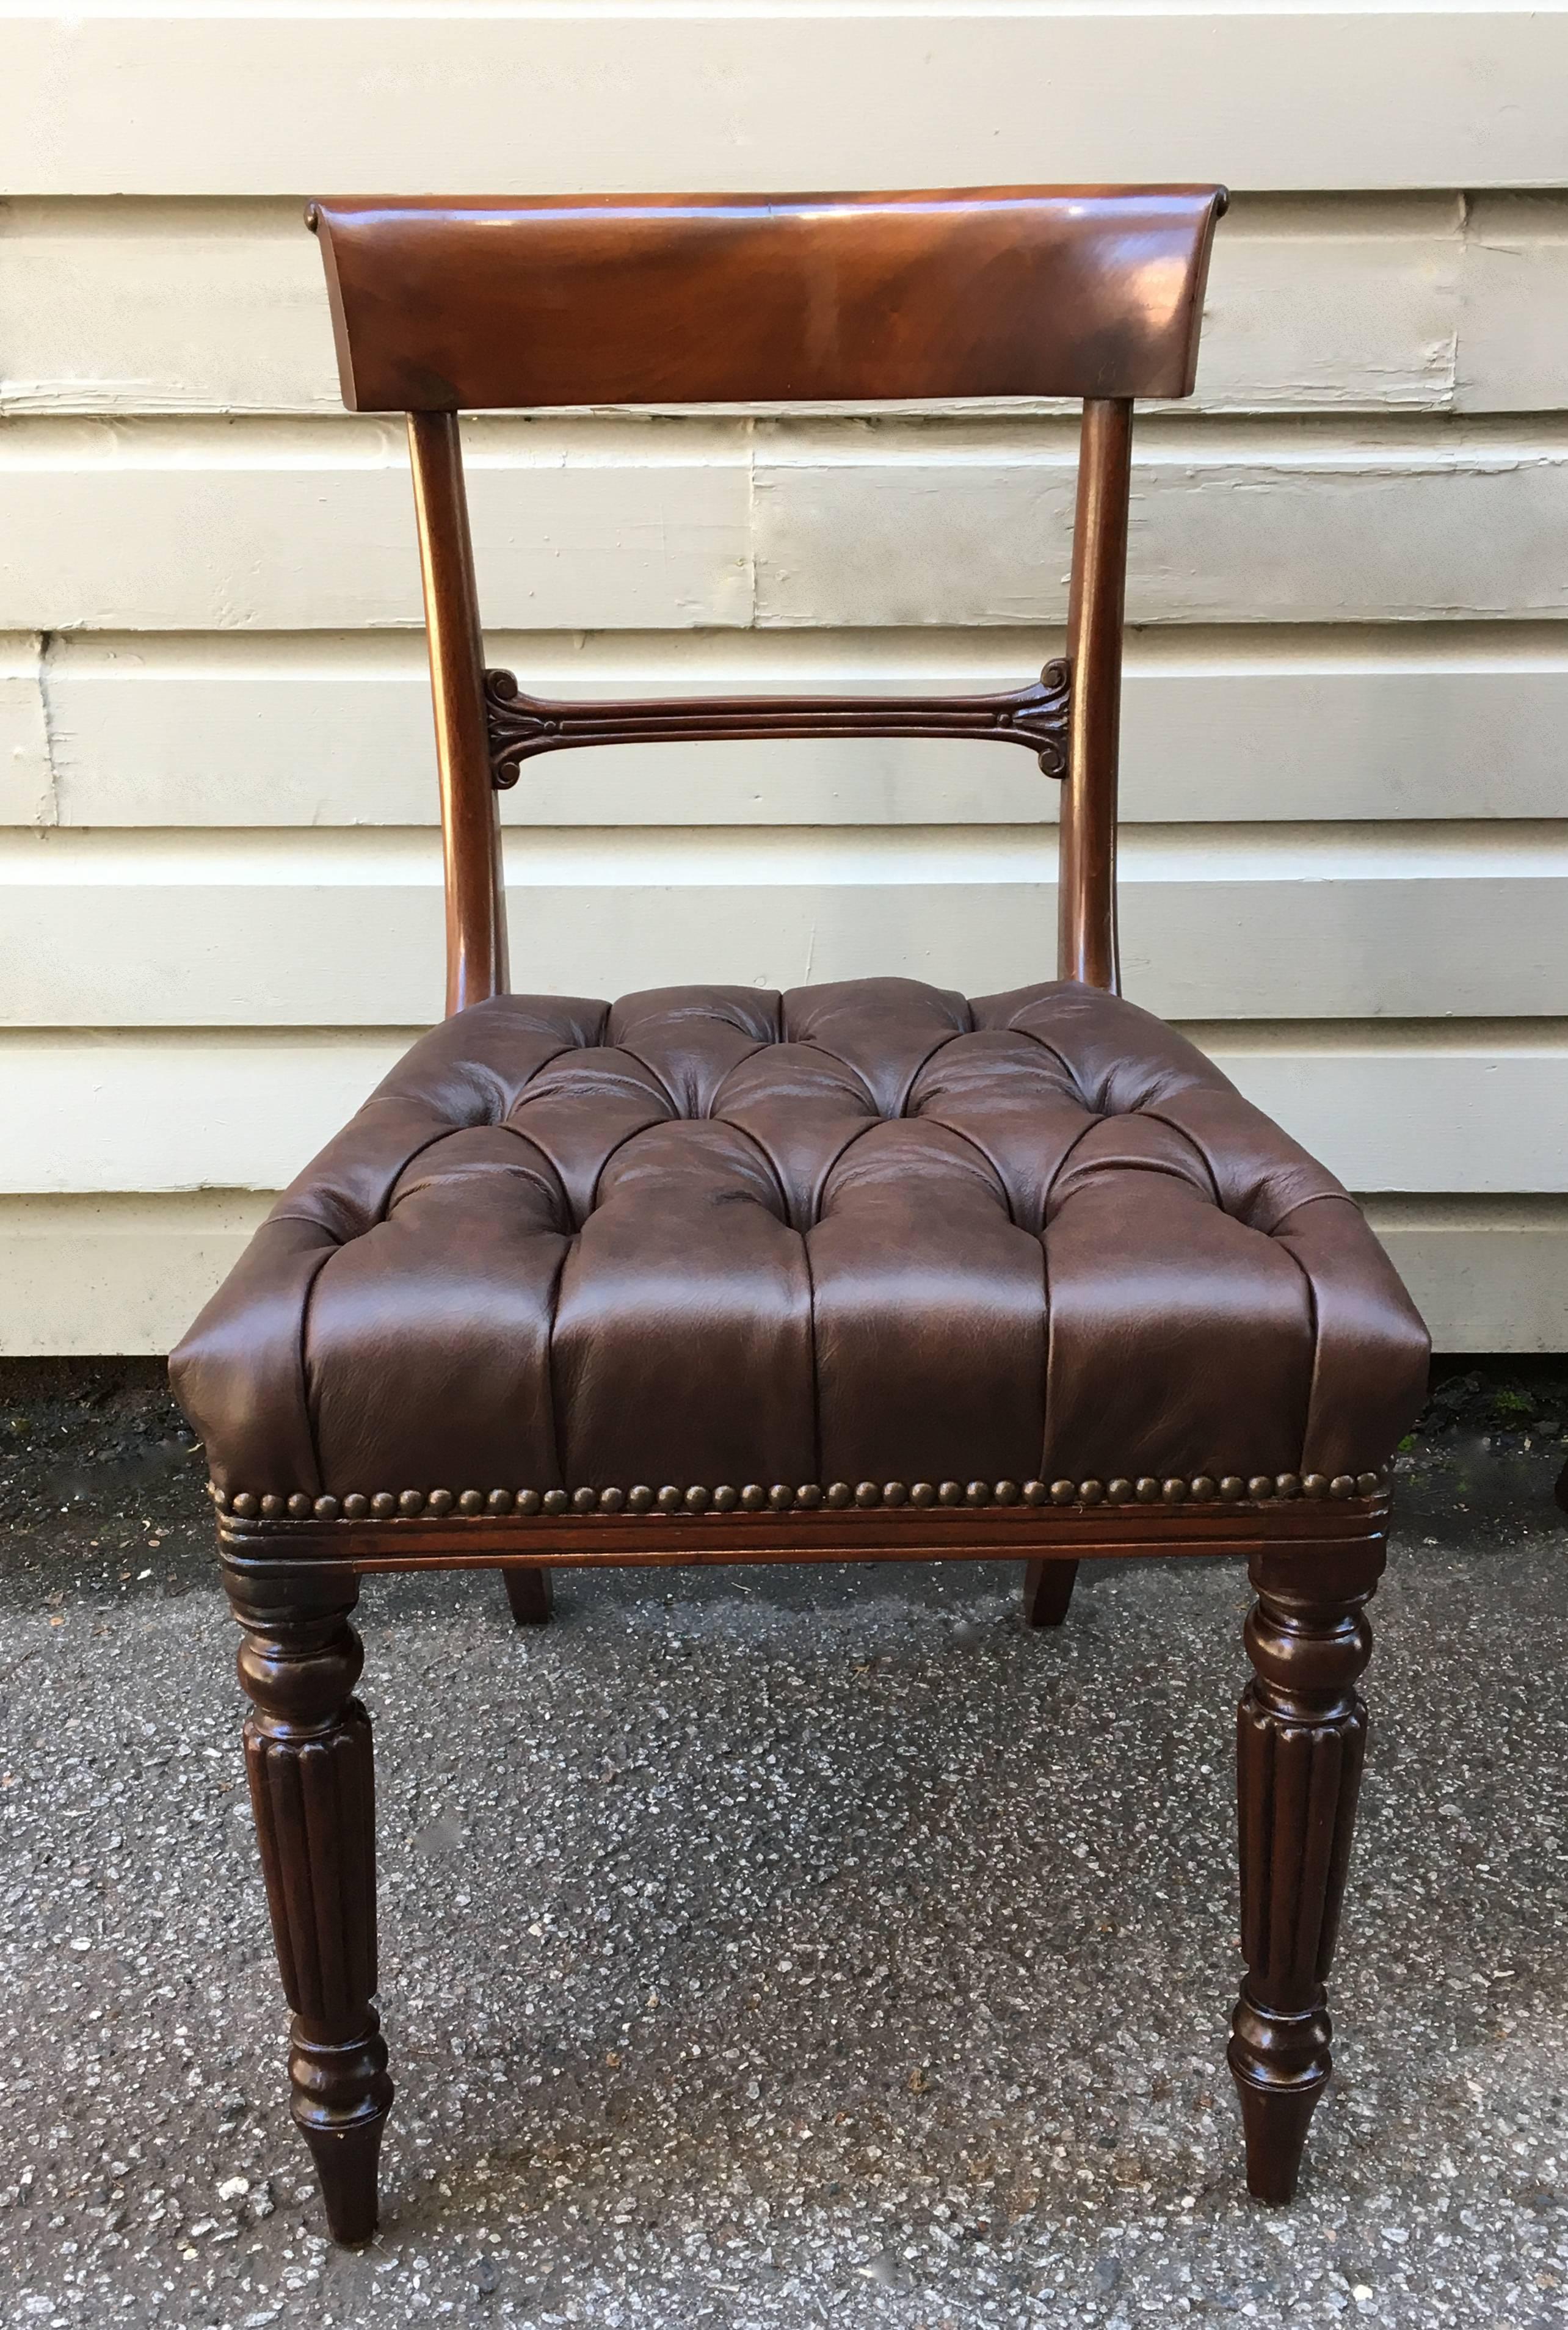 19th Century Philadelphia or Baltimore Neoclassical mahogany and tufted leather chairs. The chairs have beautiful flame mahogany curved backs with reeded center rail and turned legs with stop fluting. 